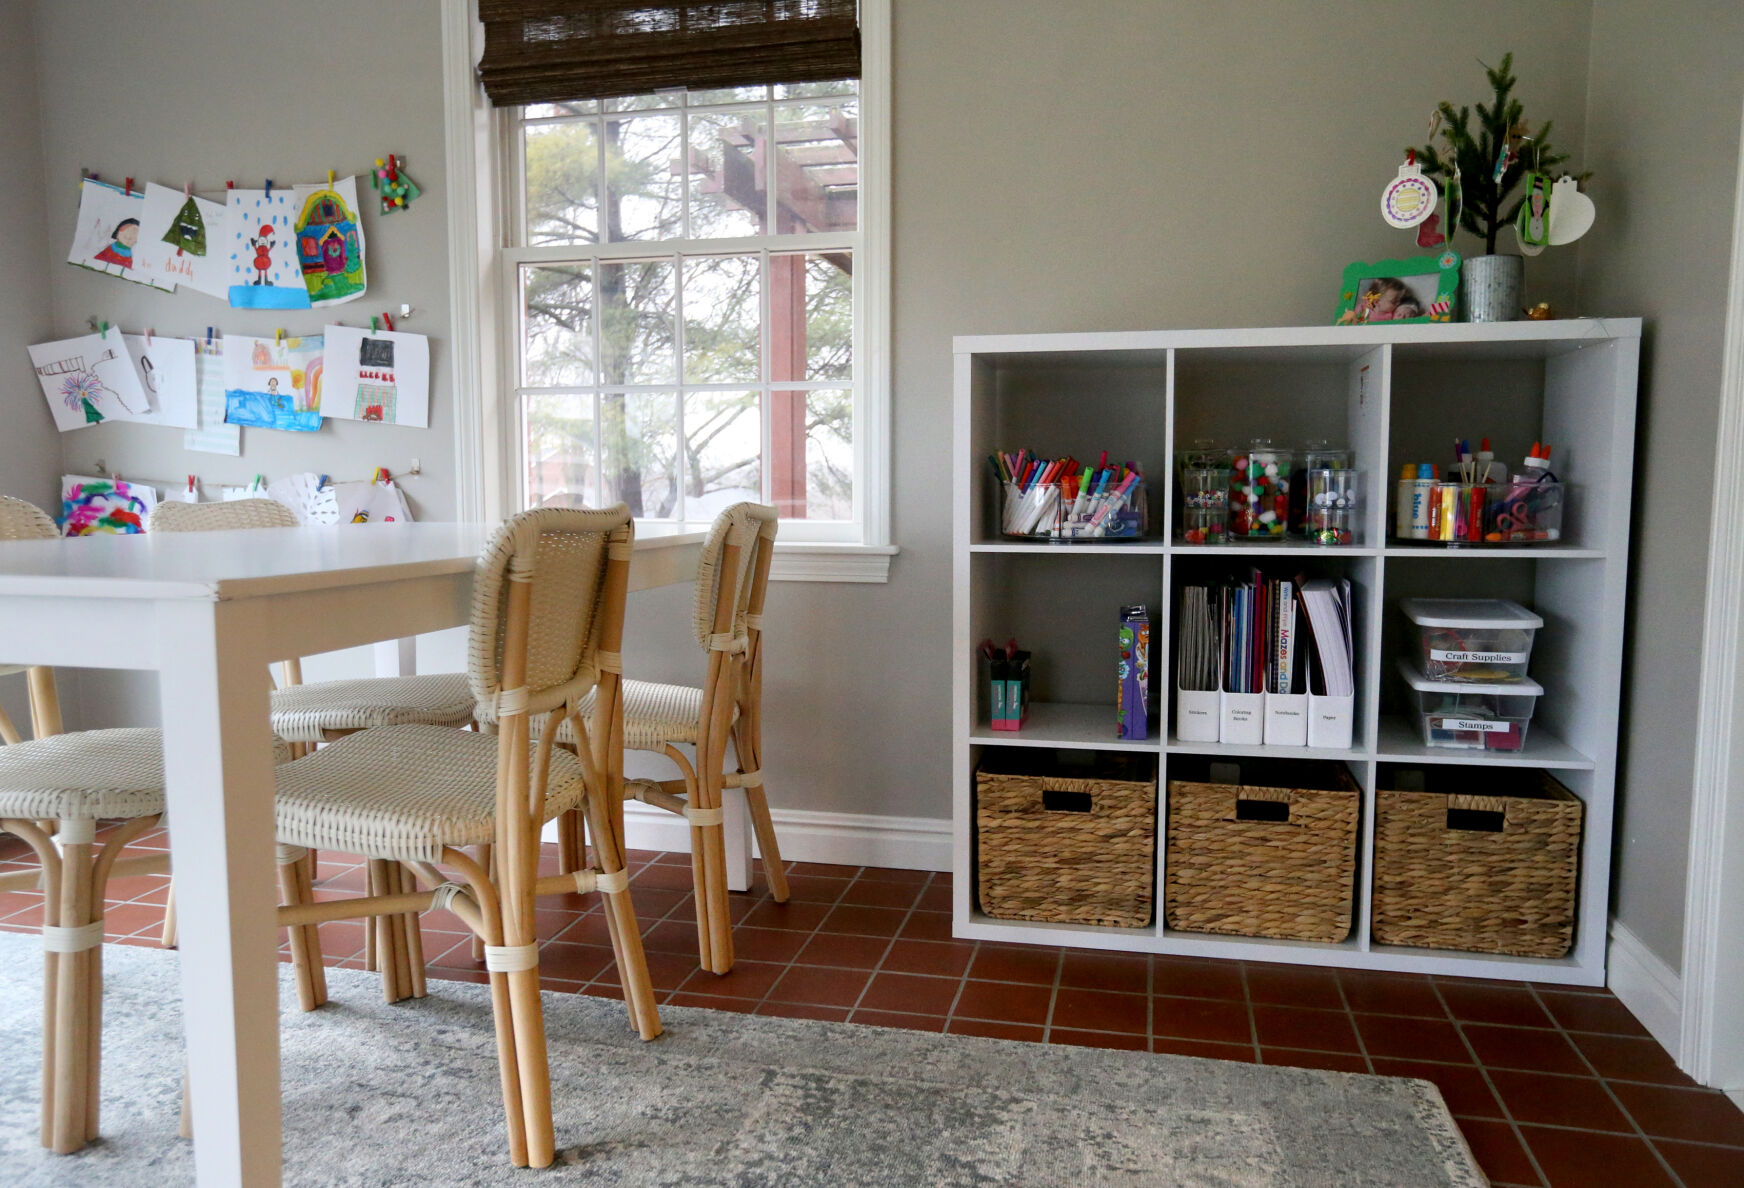 A playroom at Powers’ home in Dubuque.    PHOTO CREDIT: JESSICA REILLY